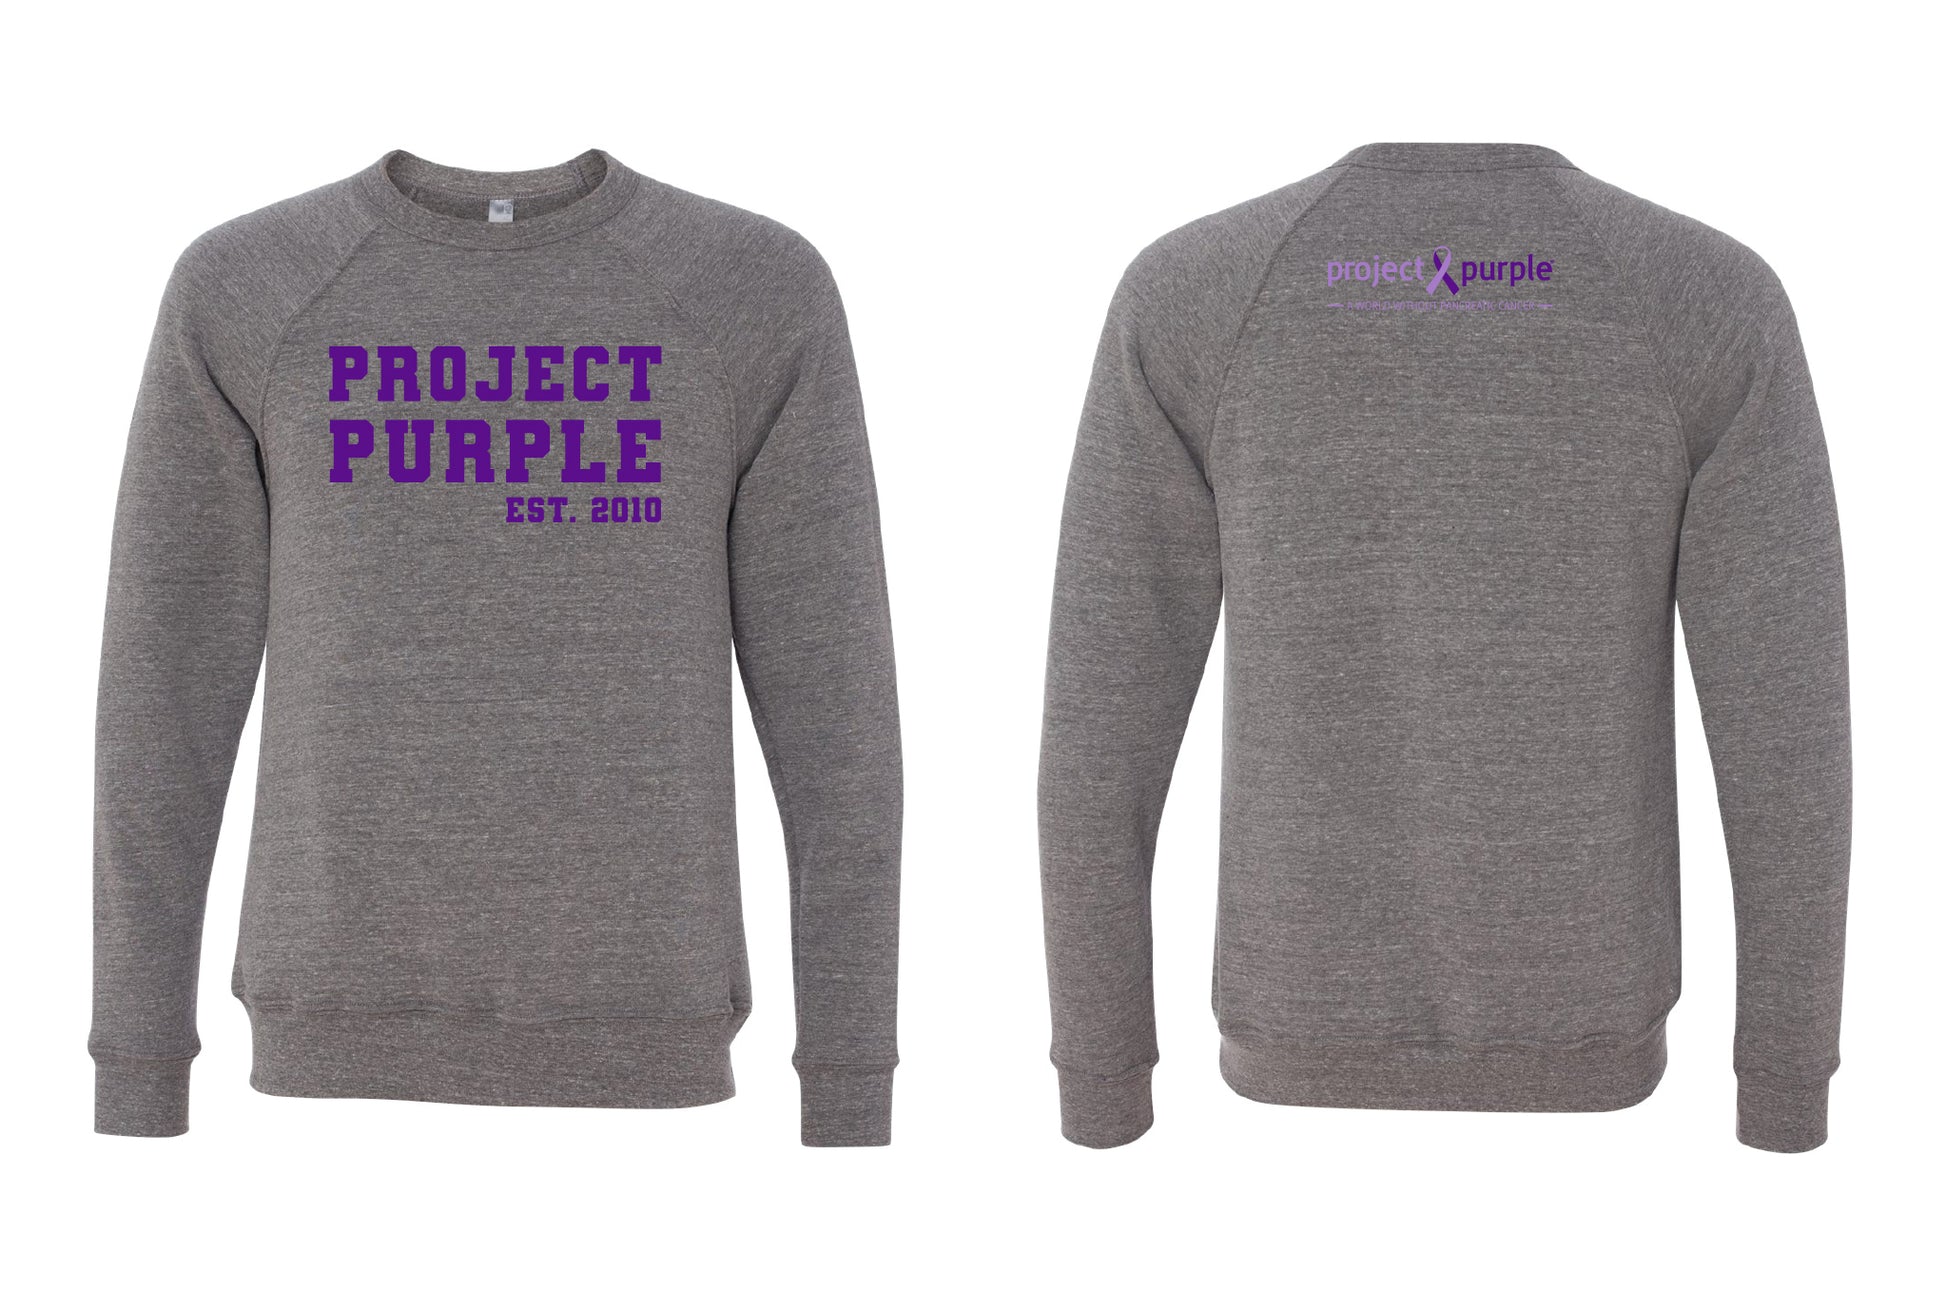 Front and Back Gray Crew Neck sweater with Purple Project Purple Logo